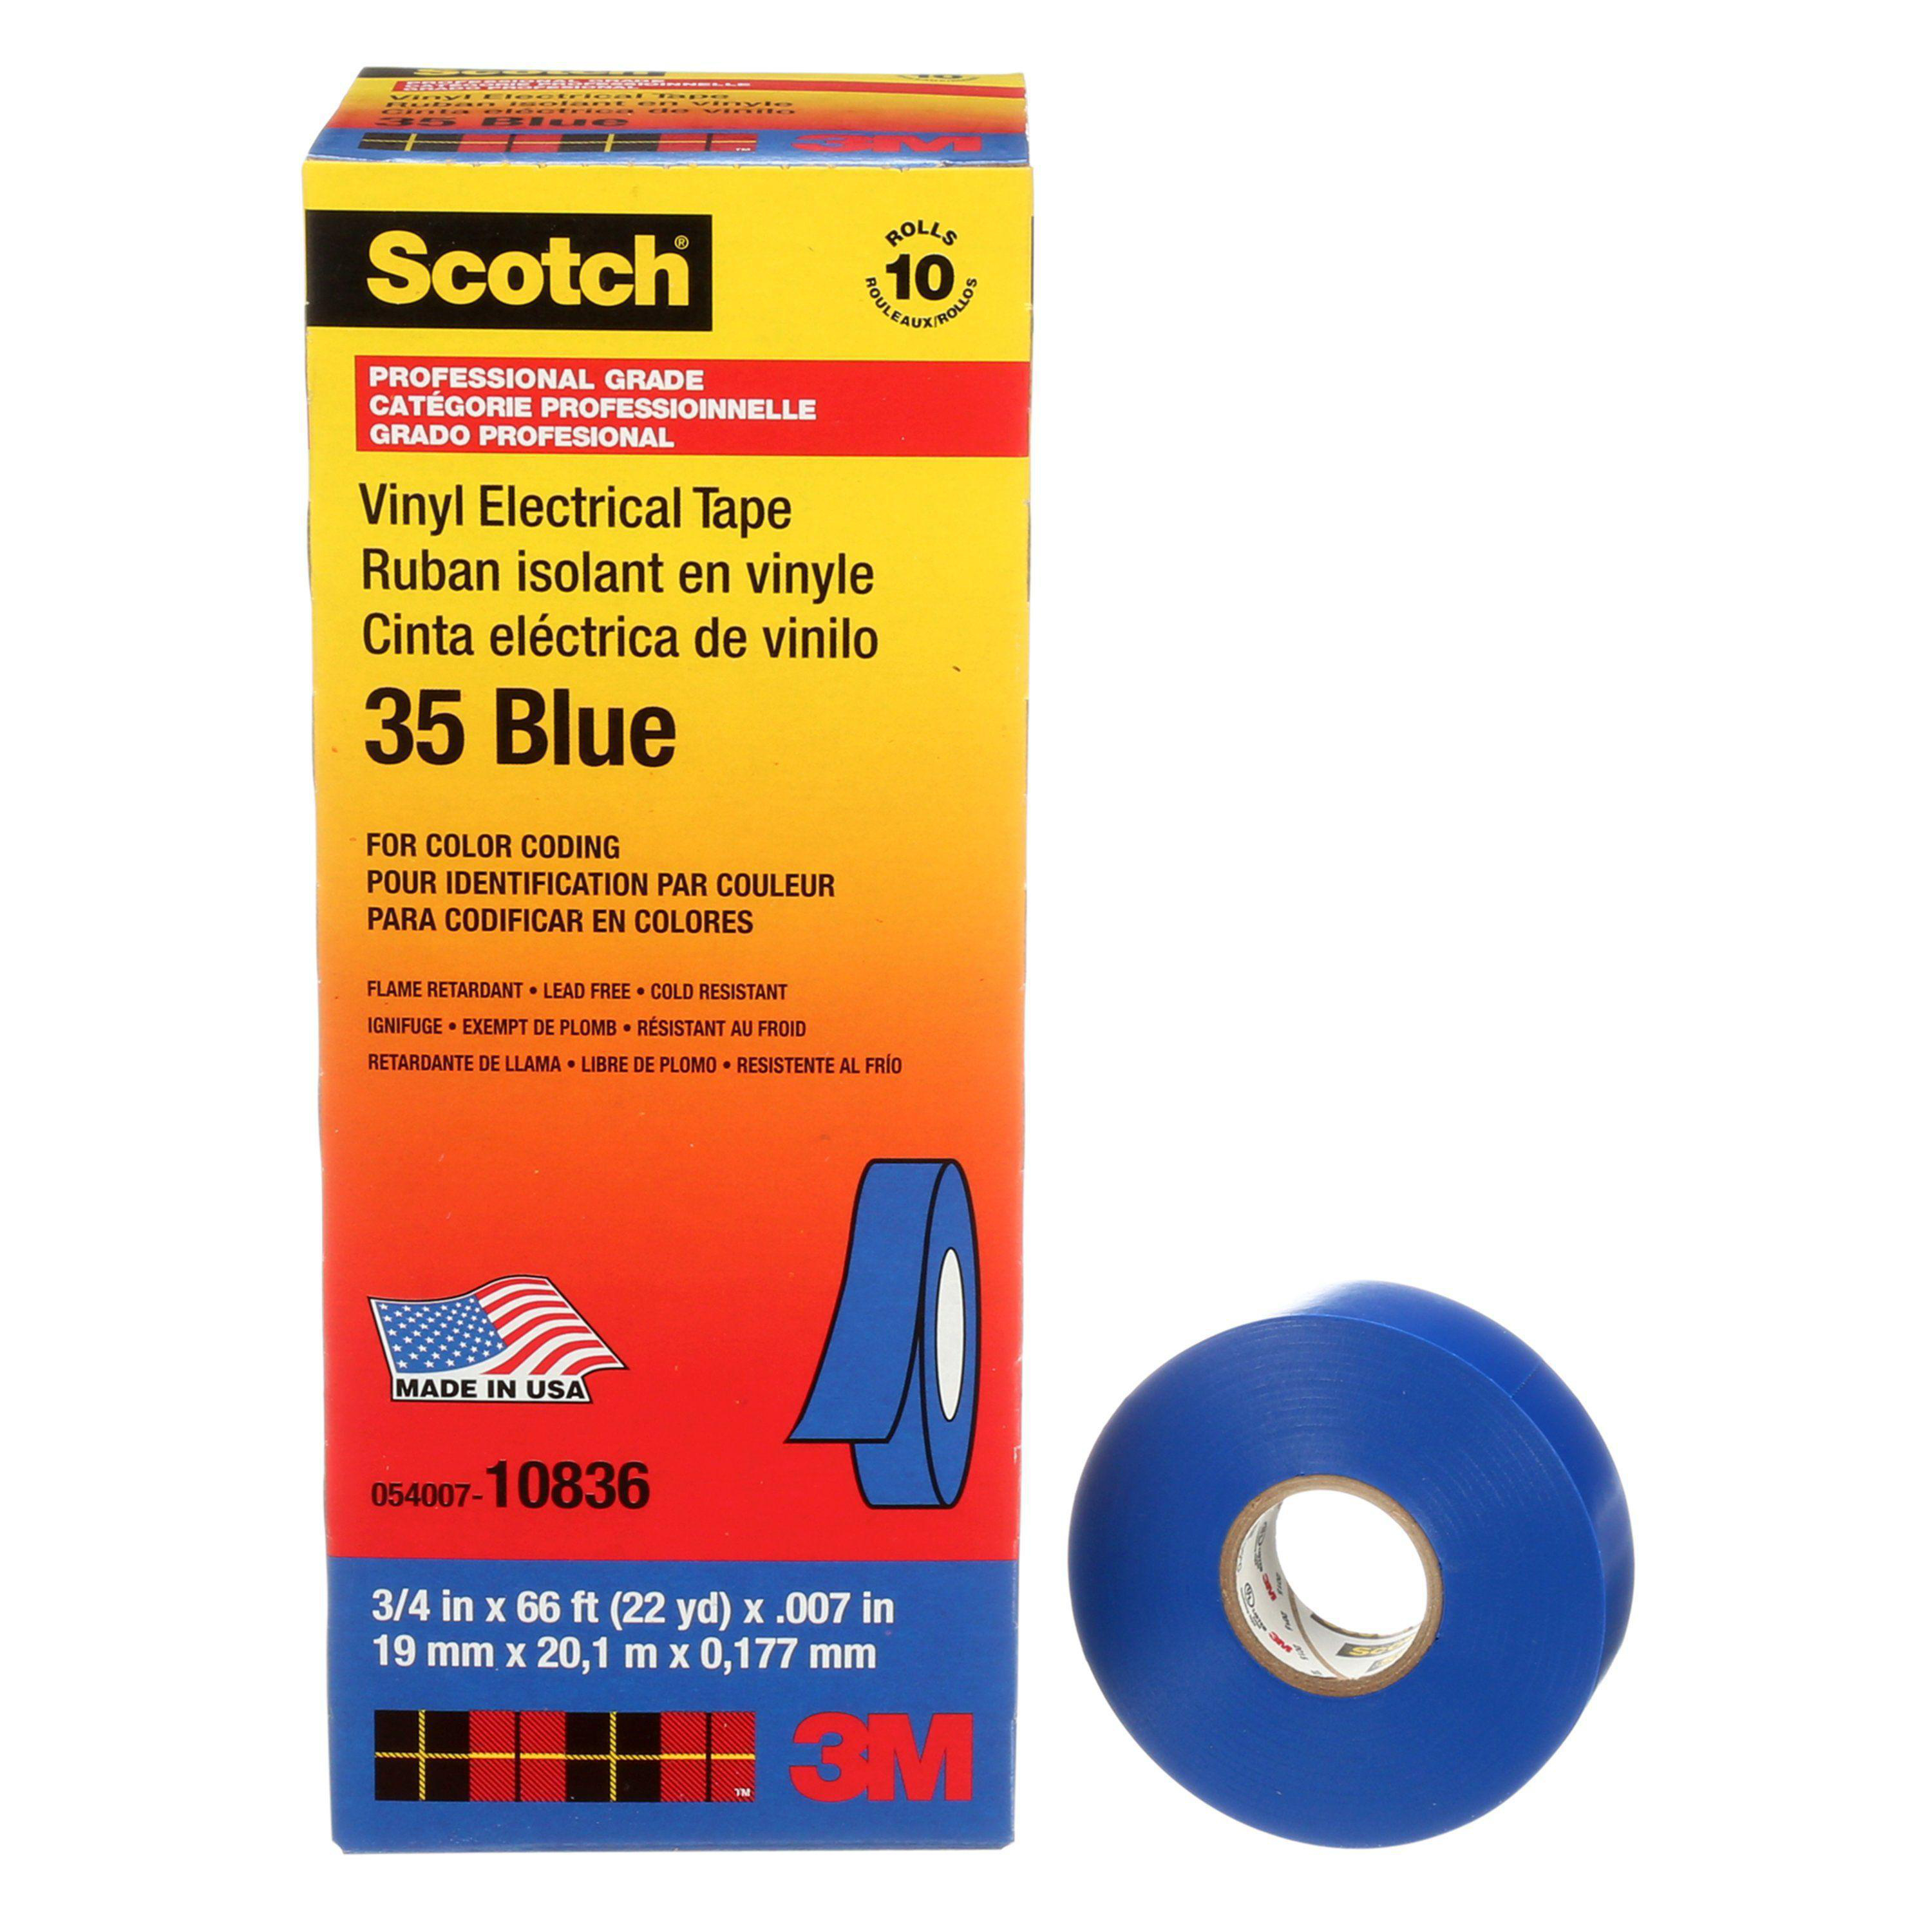 x 66-Ft. 3M COMPANY Electrical Tape Bleu Vinyl Professional Grade 3/4-In 